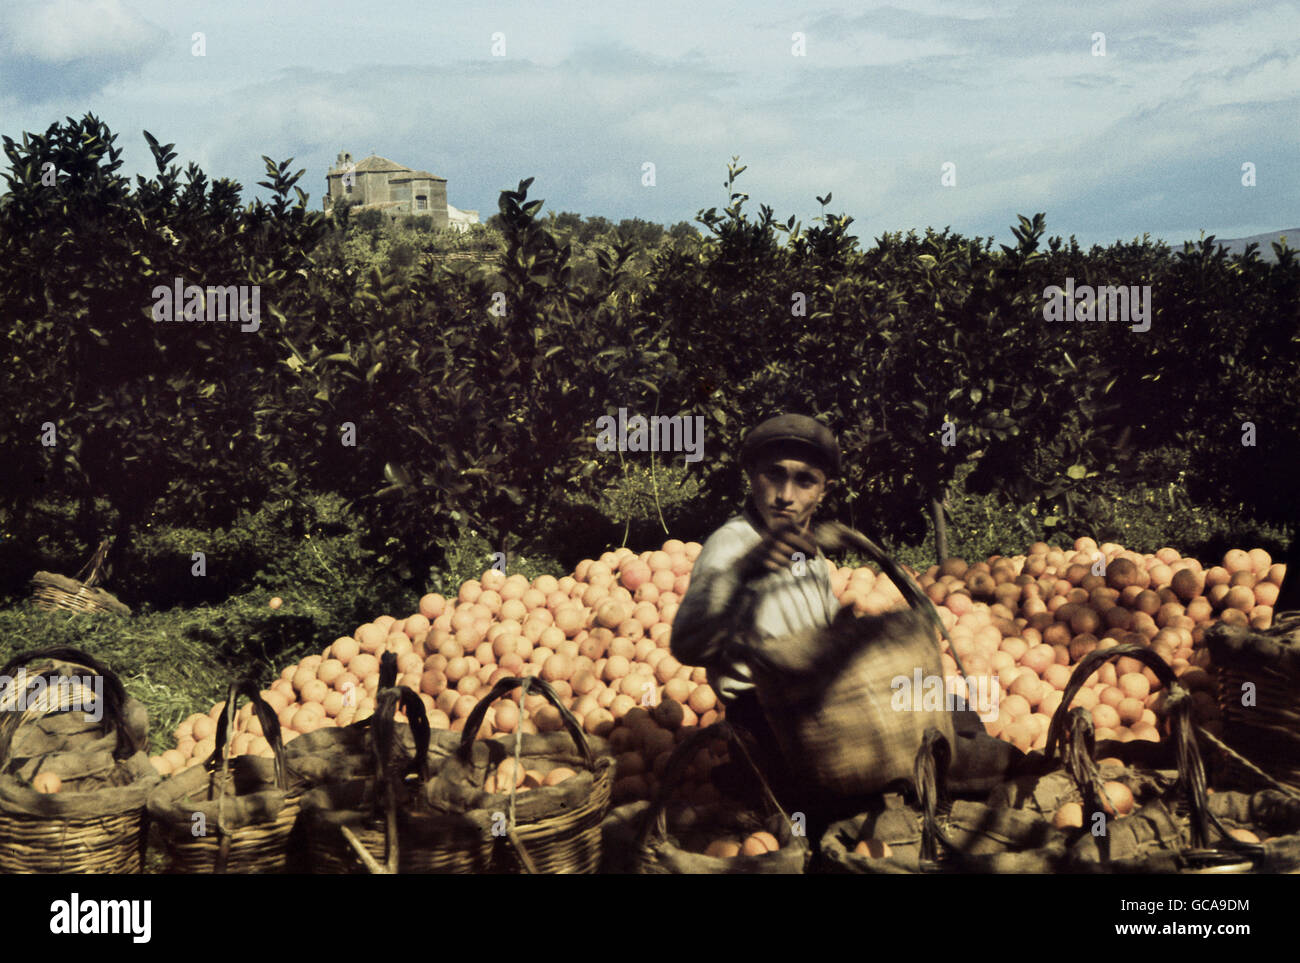 geography / travel, Italy, agriculture, oranges, crop, Sicily, 1940, Additional-Rights-Clearences-Not Available Stock Photo